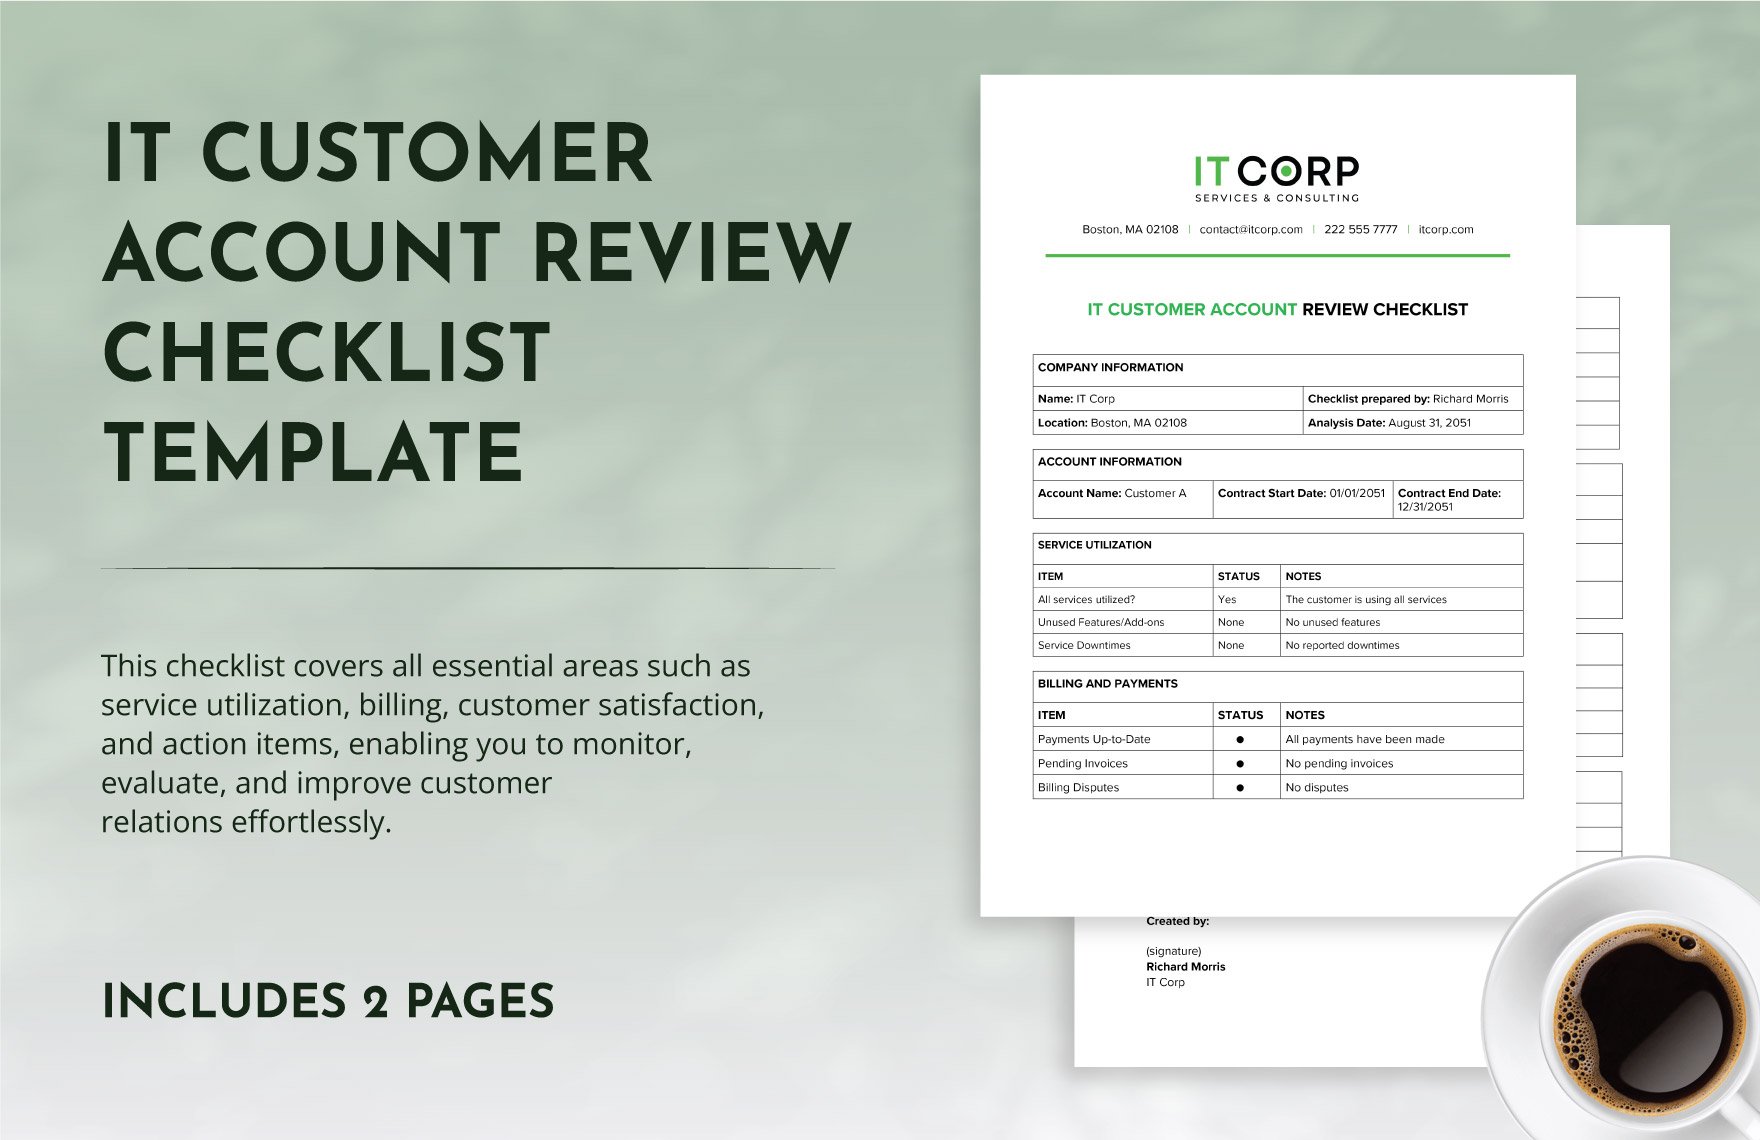 IT Customer Account Review Checklist Template in Word, Google Docs, PDF